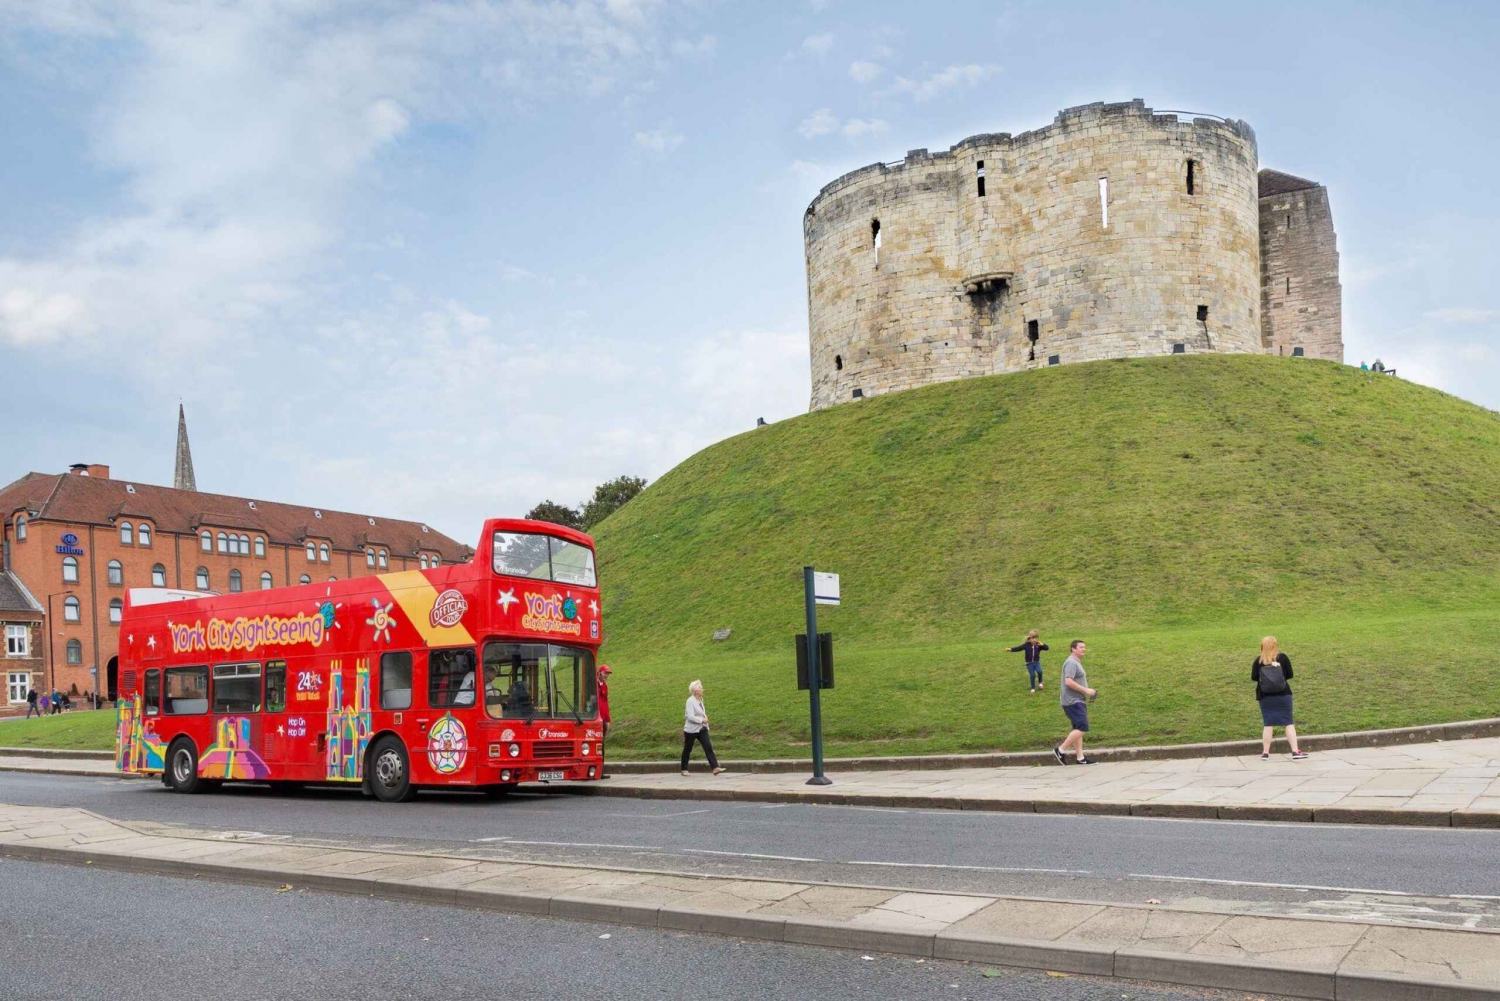 York: City Sightseeing Hop-On Hop-Off Bus Tour